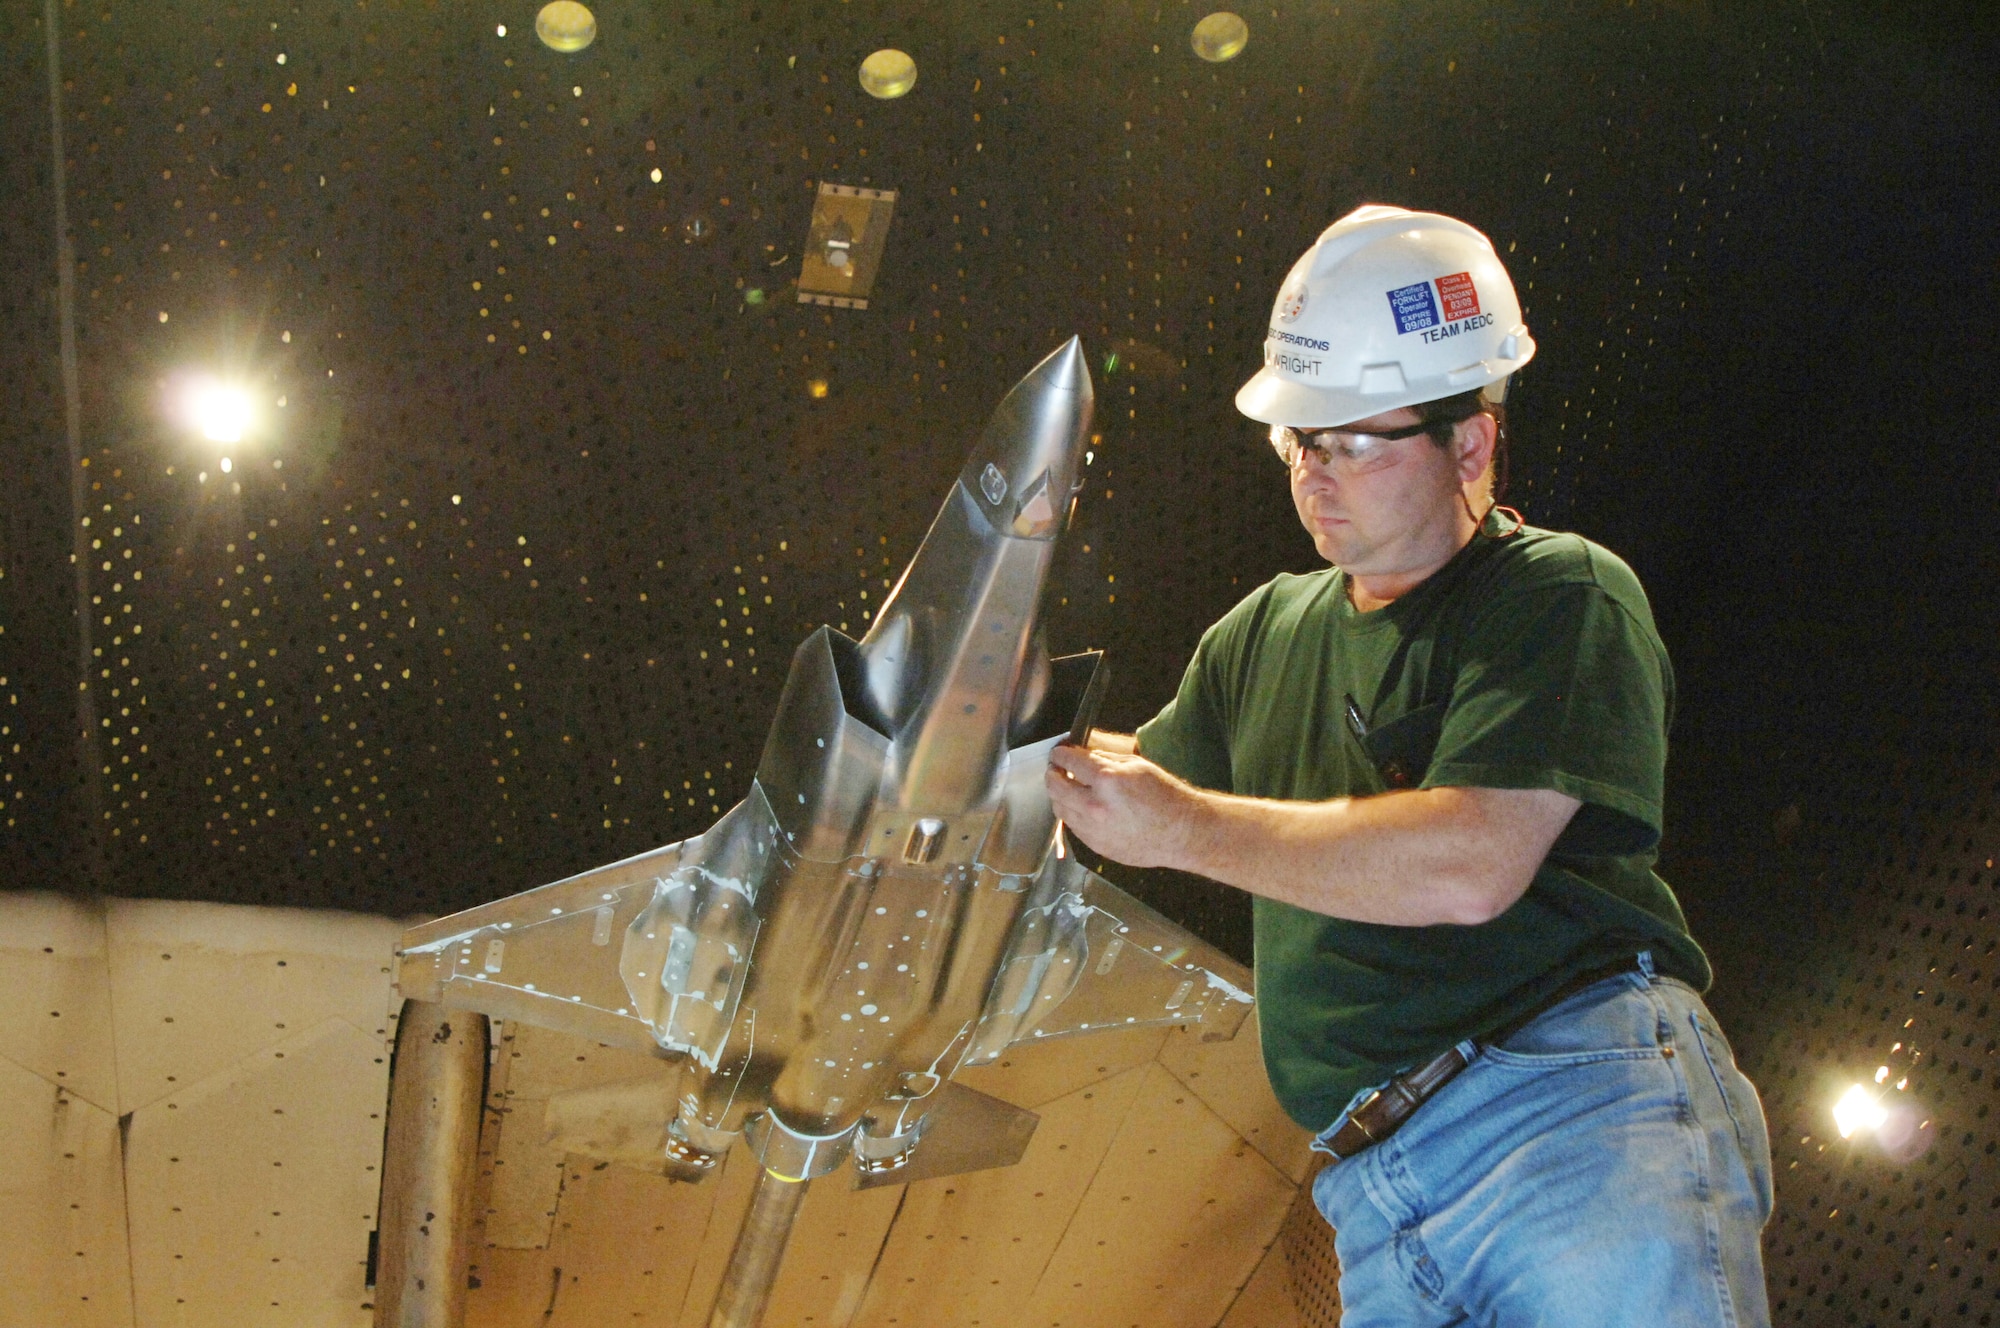 Tim Wright examines an F-35 LIghtning II Joint Strike Fighter model in the Arnold Engineering Development Center's 16-foot transonic wind tunnel at Arnold Air Force Base, Tenn. The information from testing will go into a database to refine and validate the aircraft designs for flight testing. (U.S. Air Force photo/David Housch)